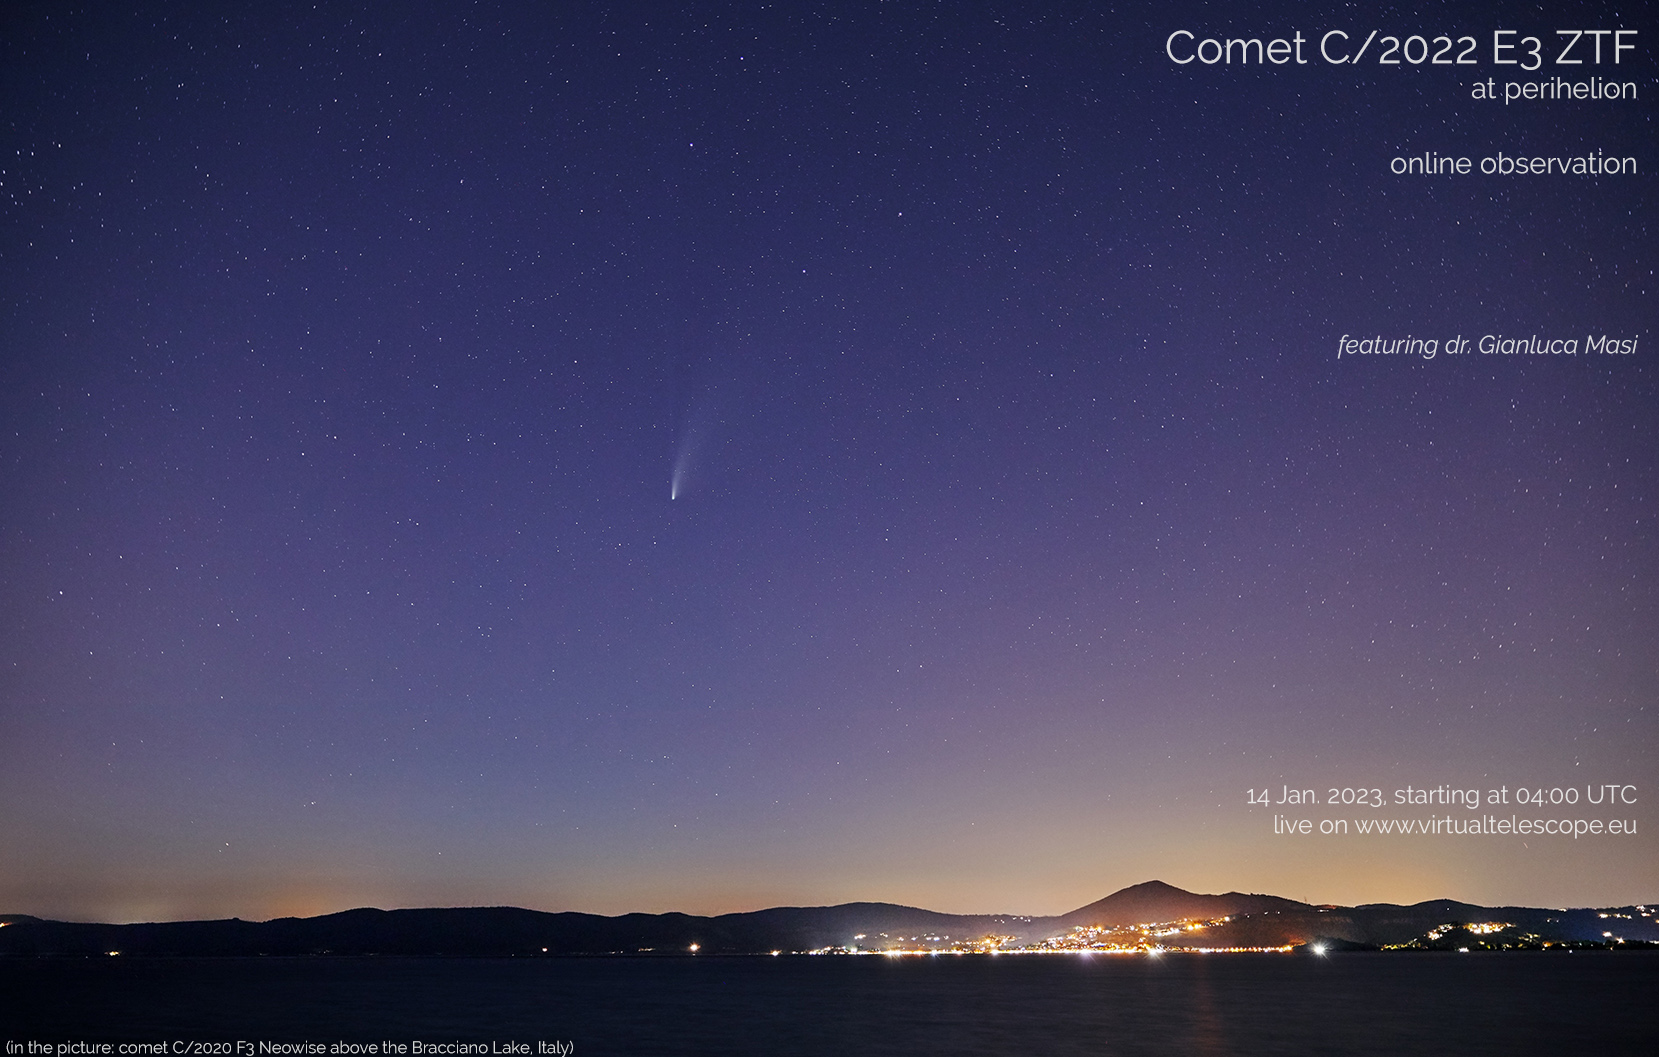 Comet C/2022 E3 ZTF at perihelion: poster of the 14 Jan. 2023 event.